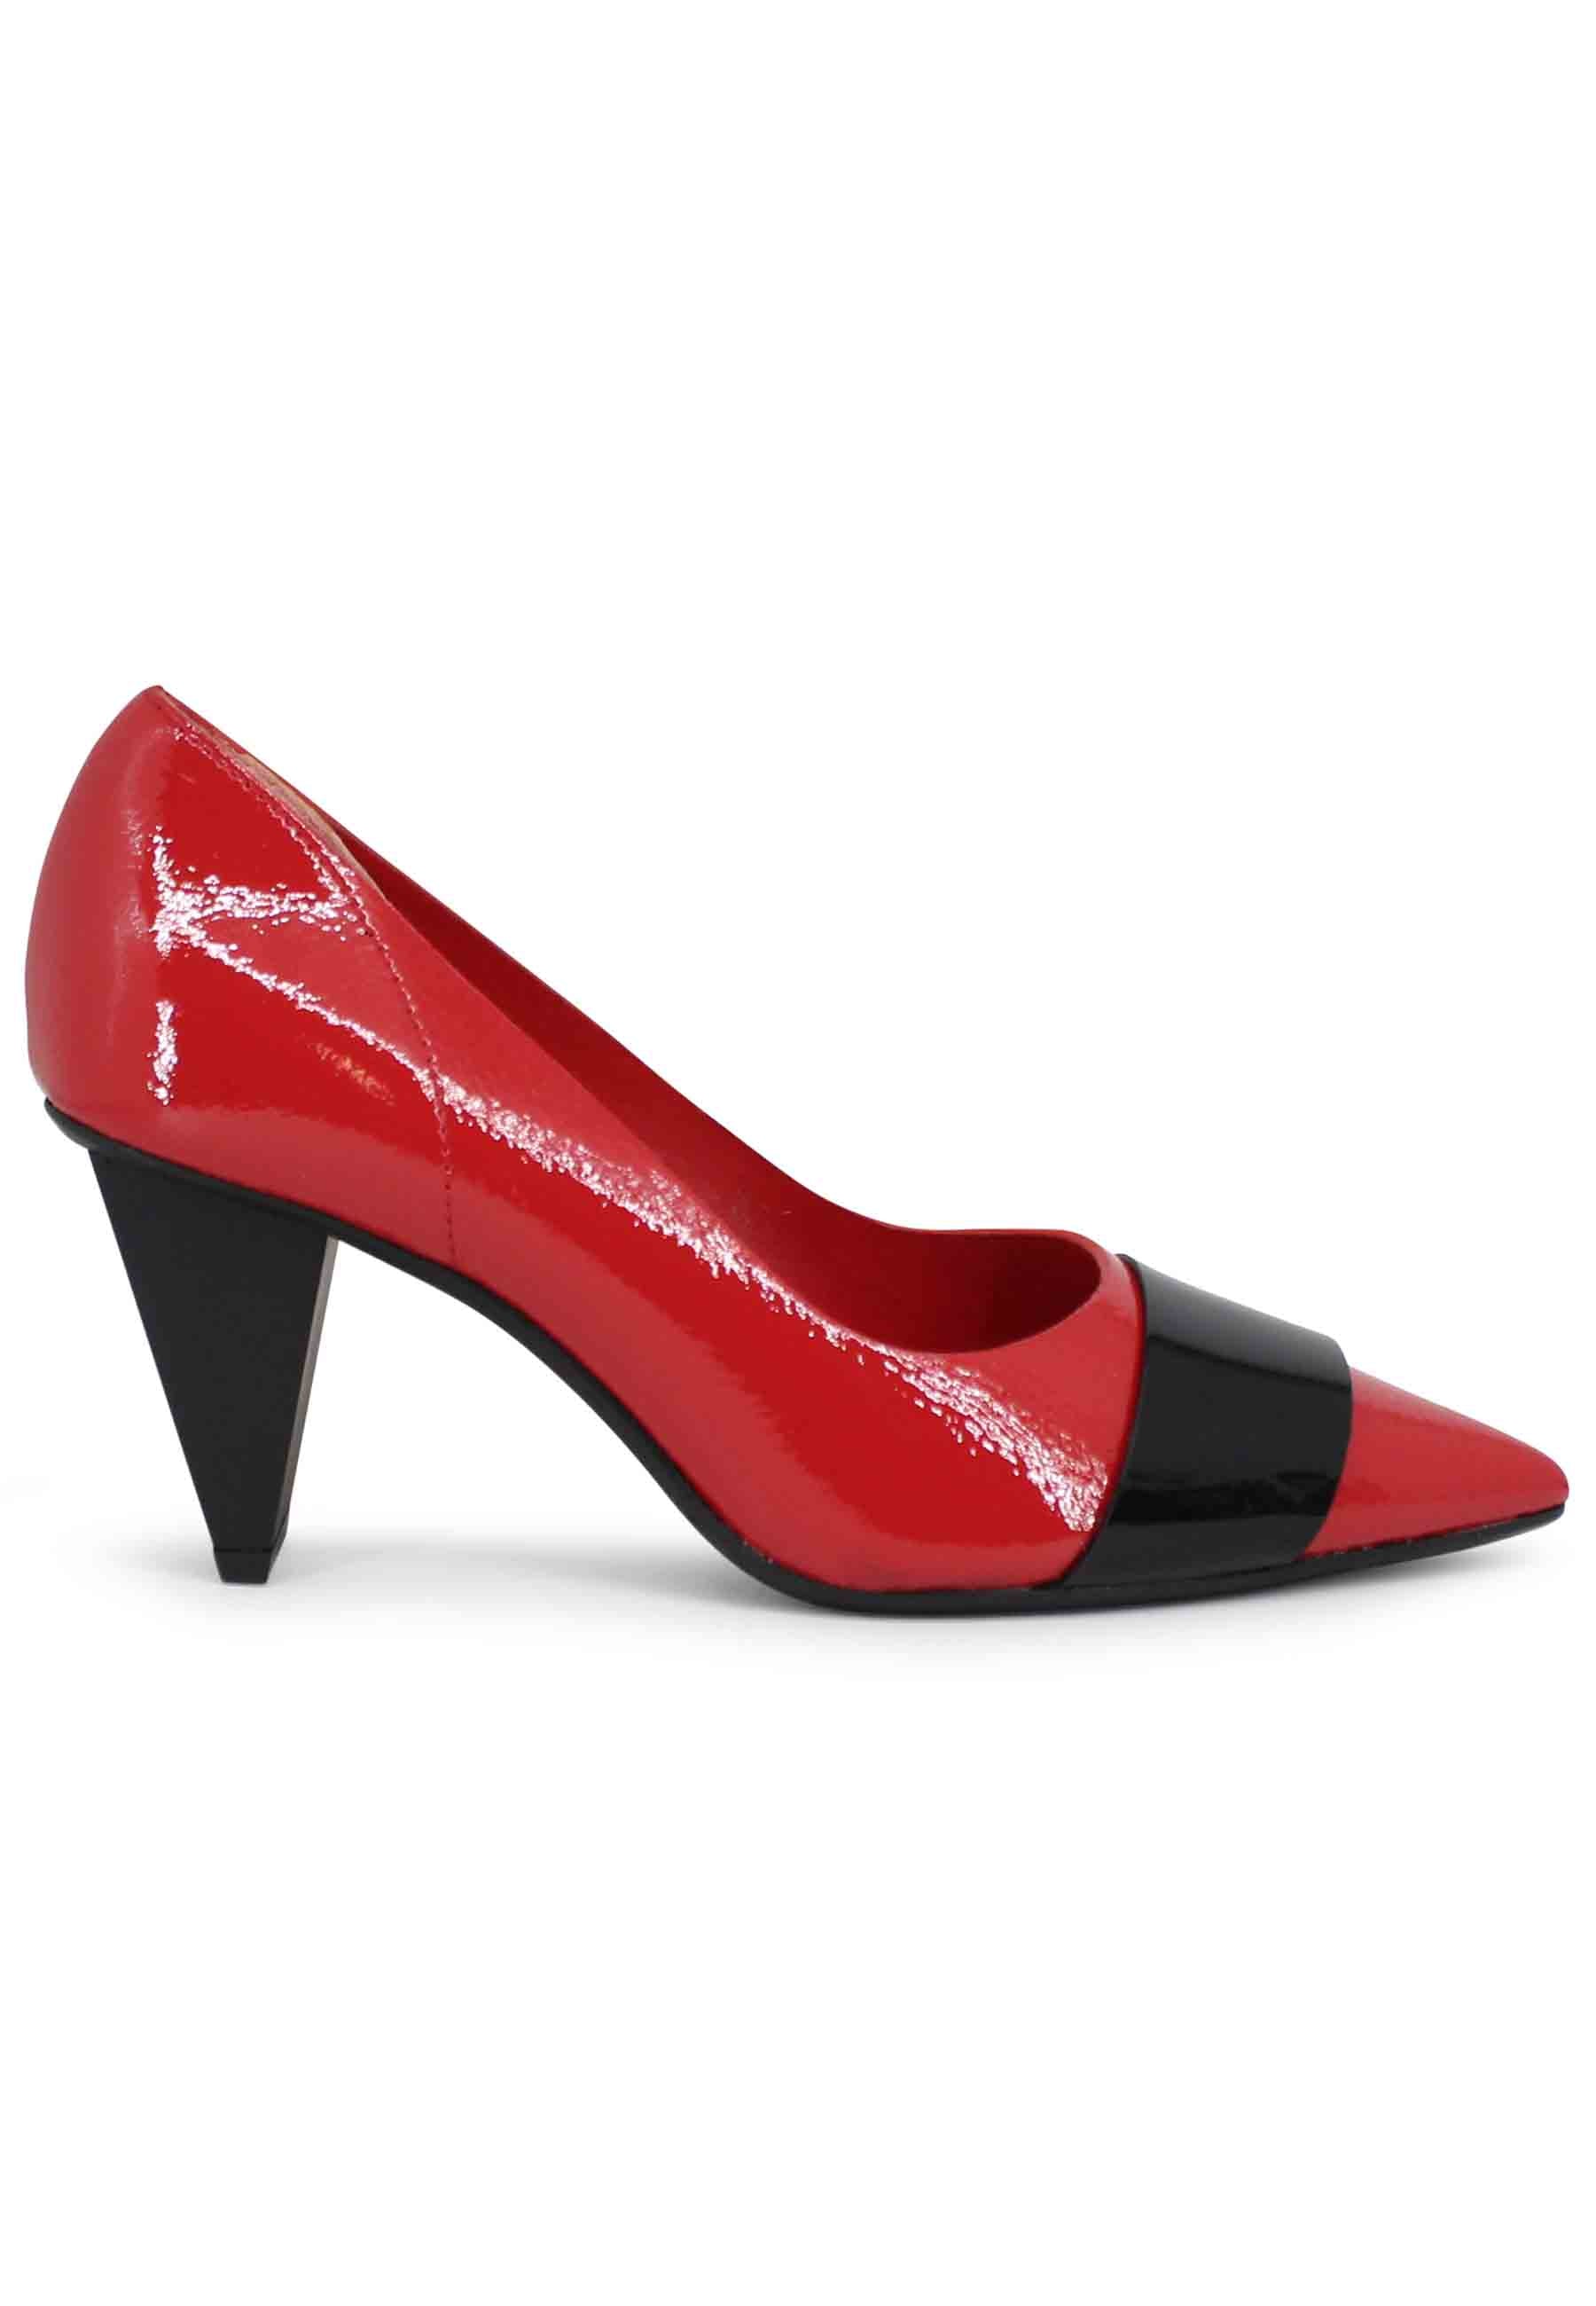 Women's pumps in red patent leather